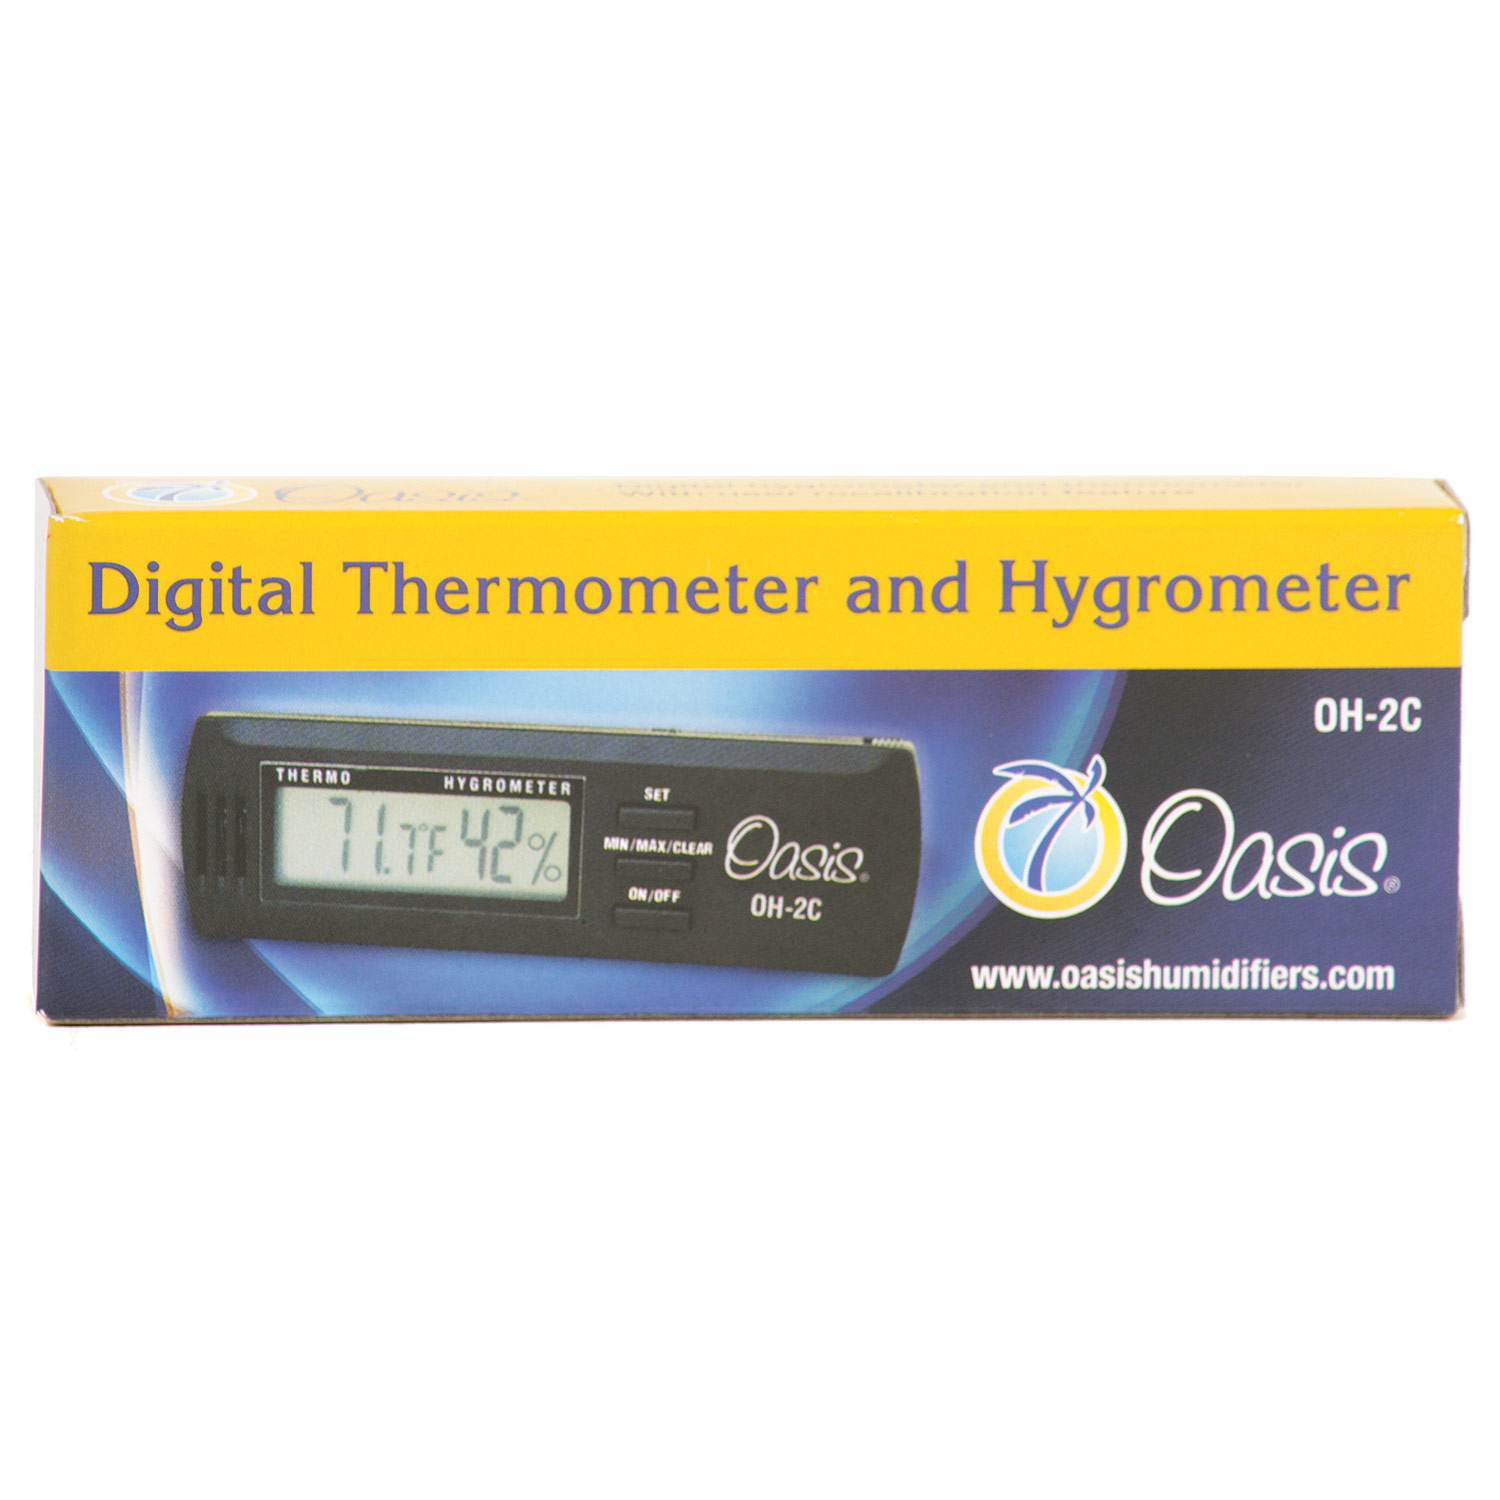 Oasis OH-2+ Digital Hygrometer/Thermometer